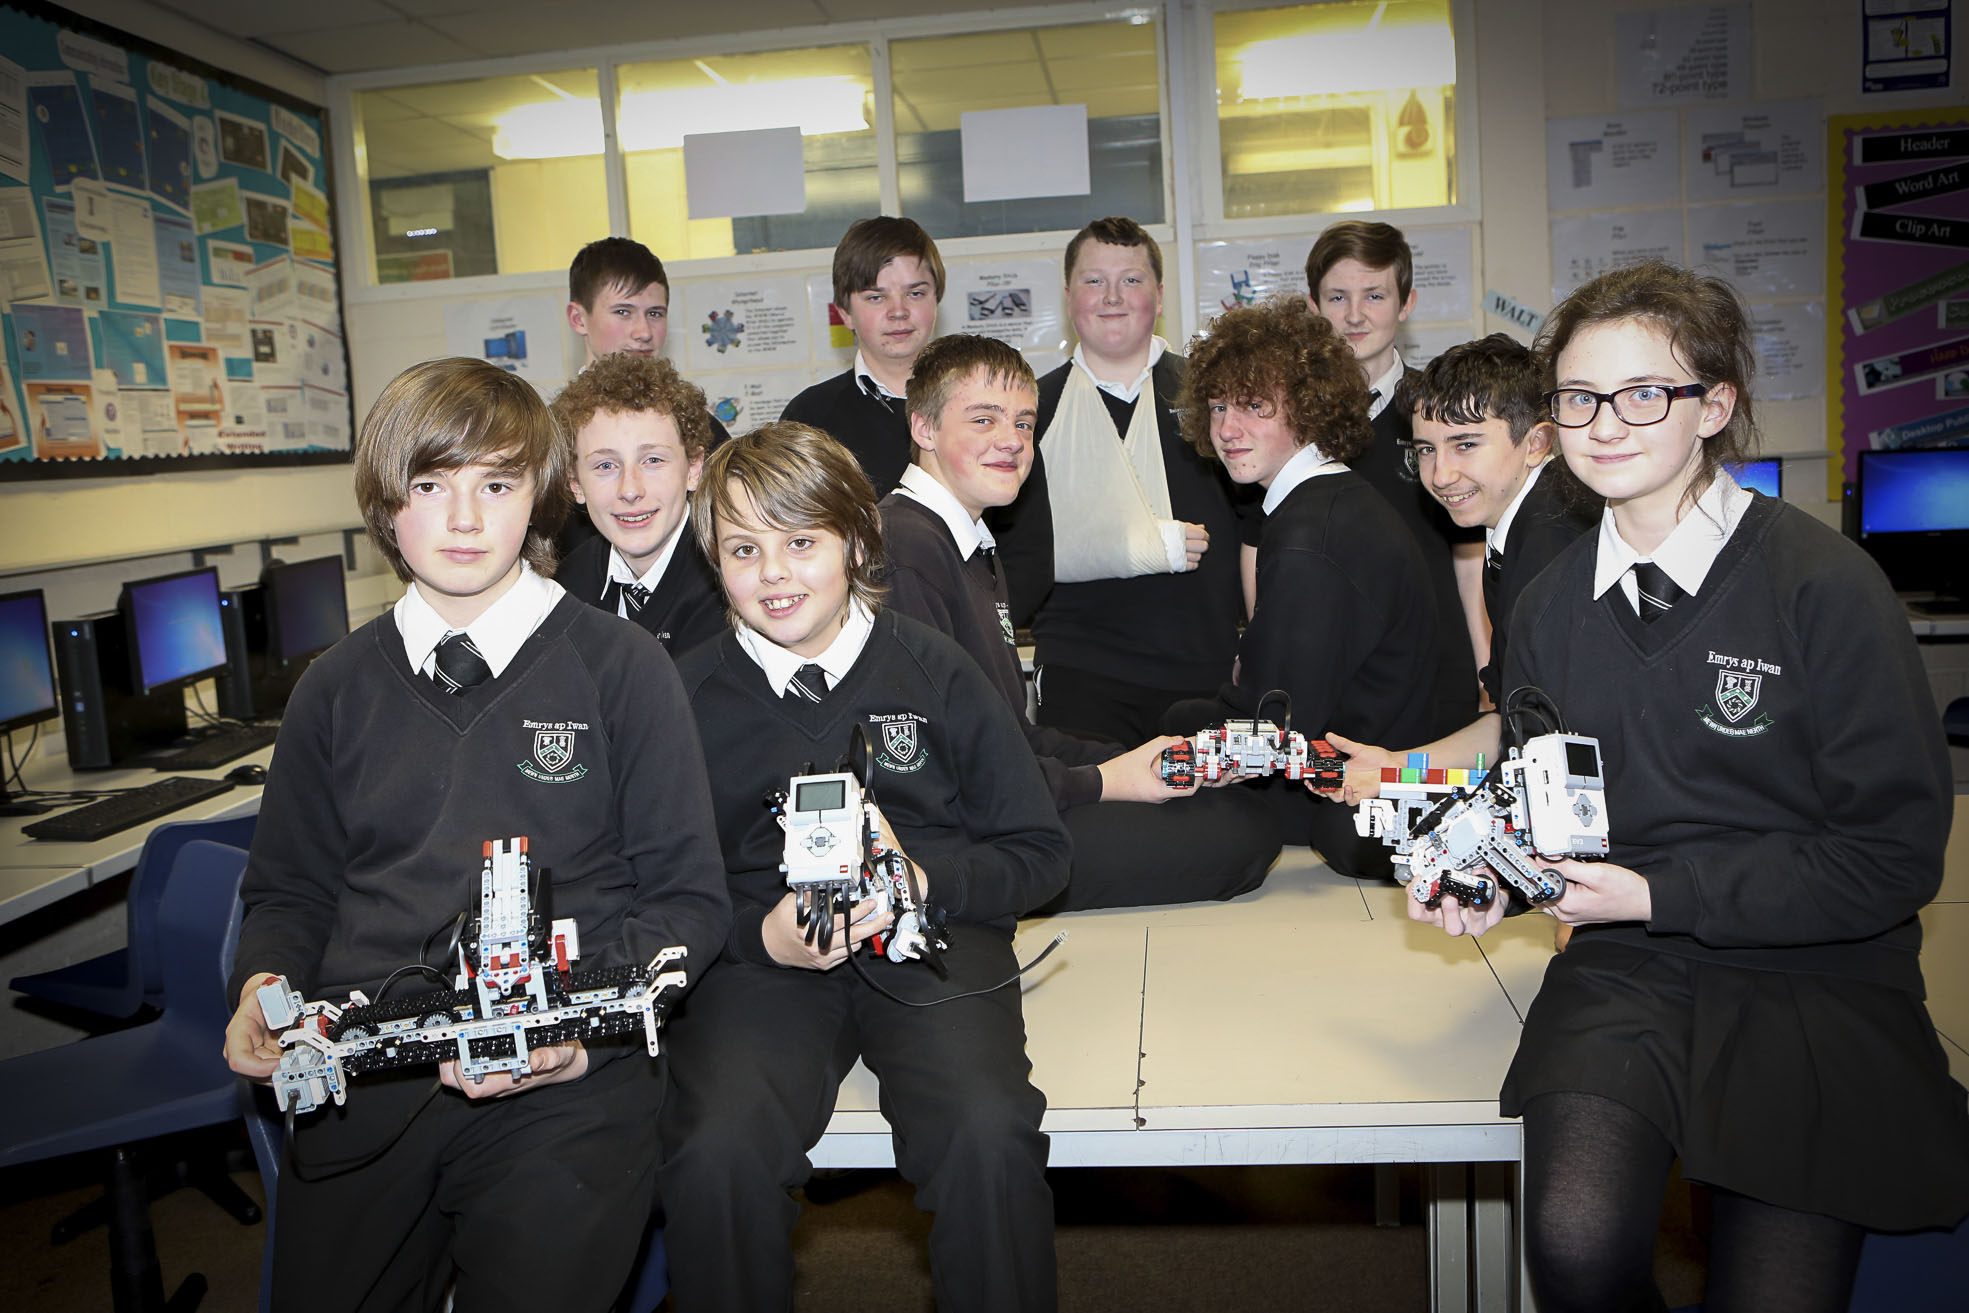 Youngsters crack computer computing and build robots at Abergele school